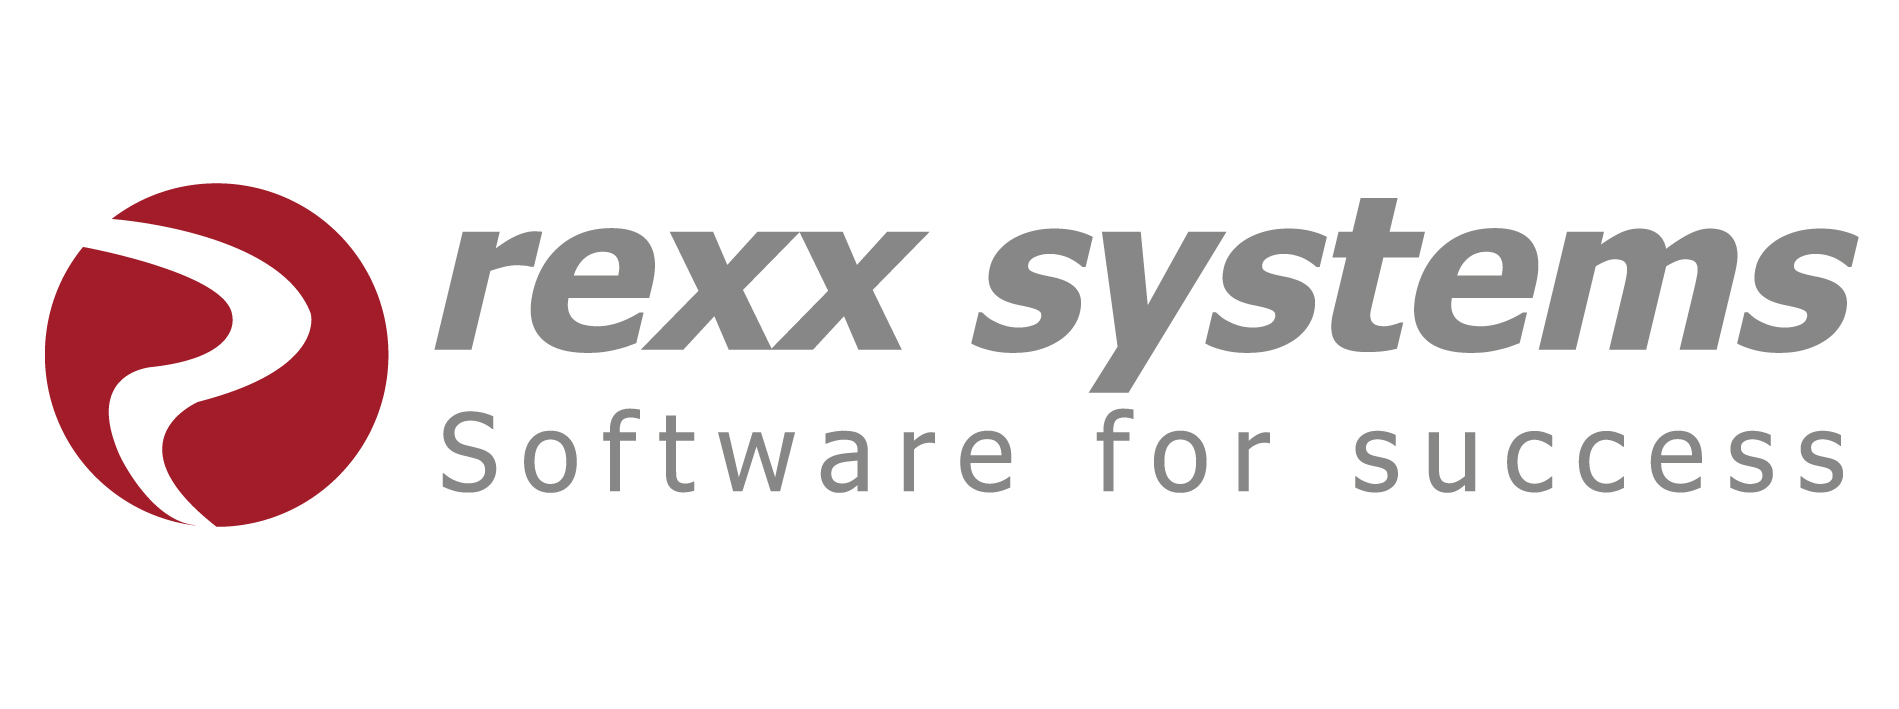 rexx-systems-logo-claim-lang